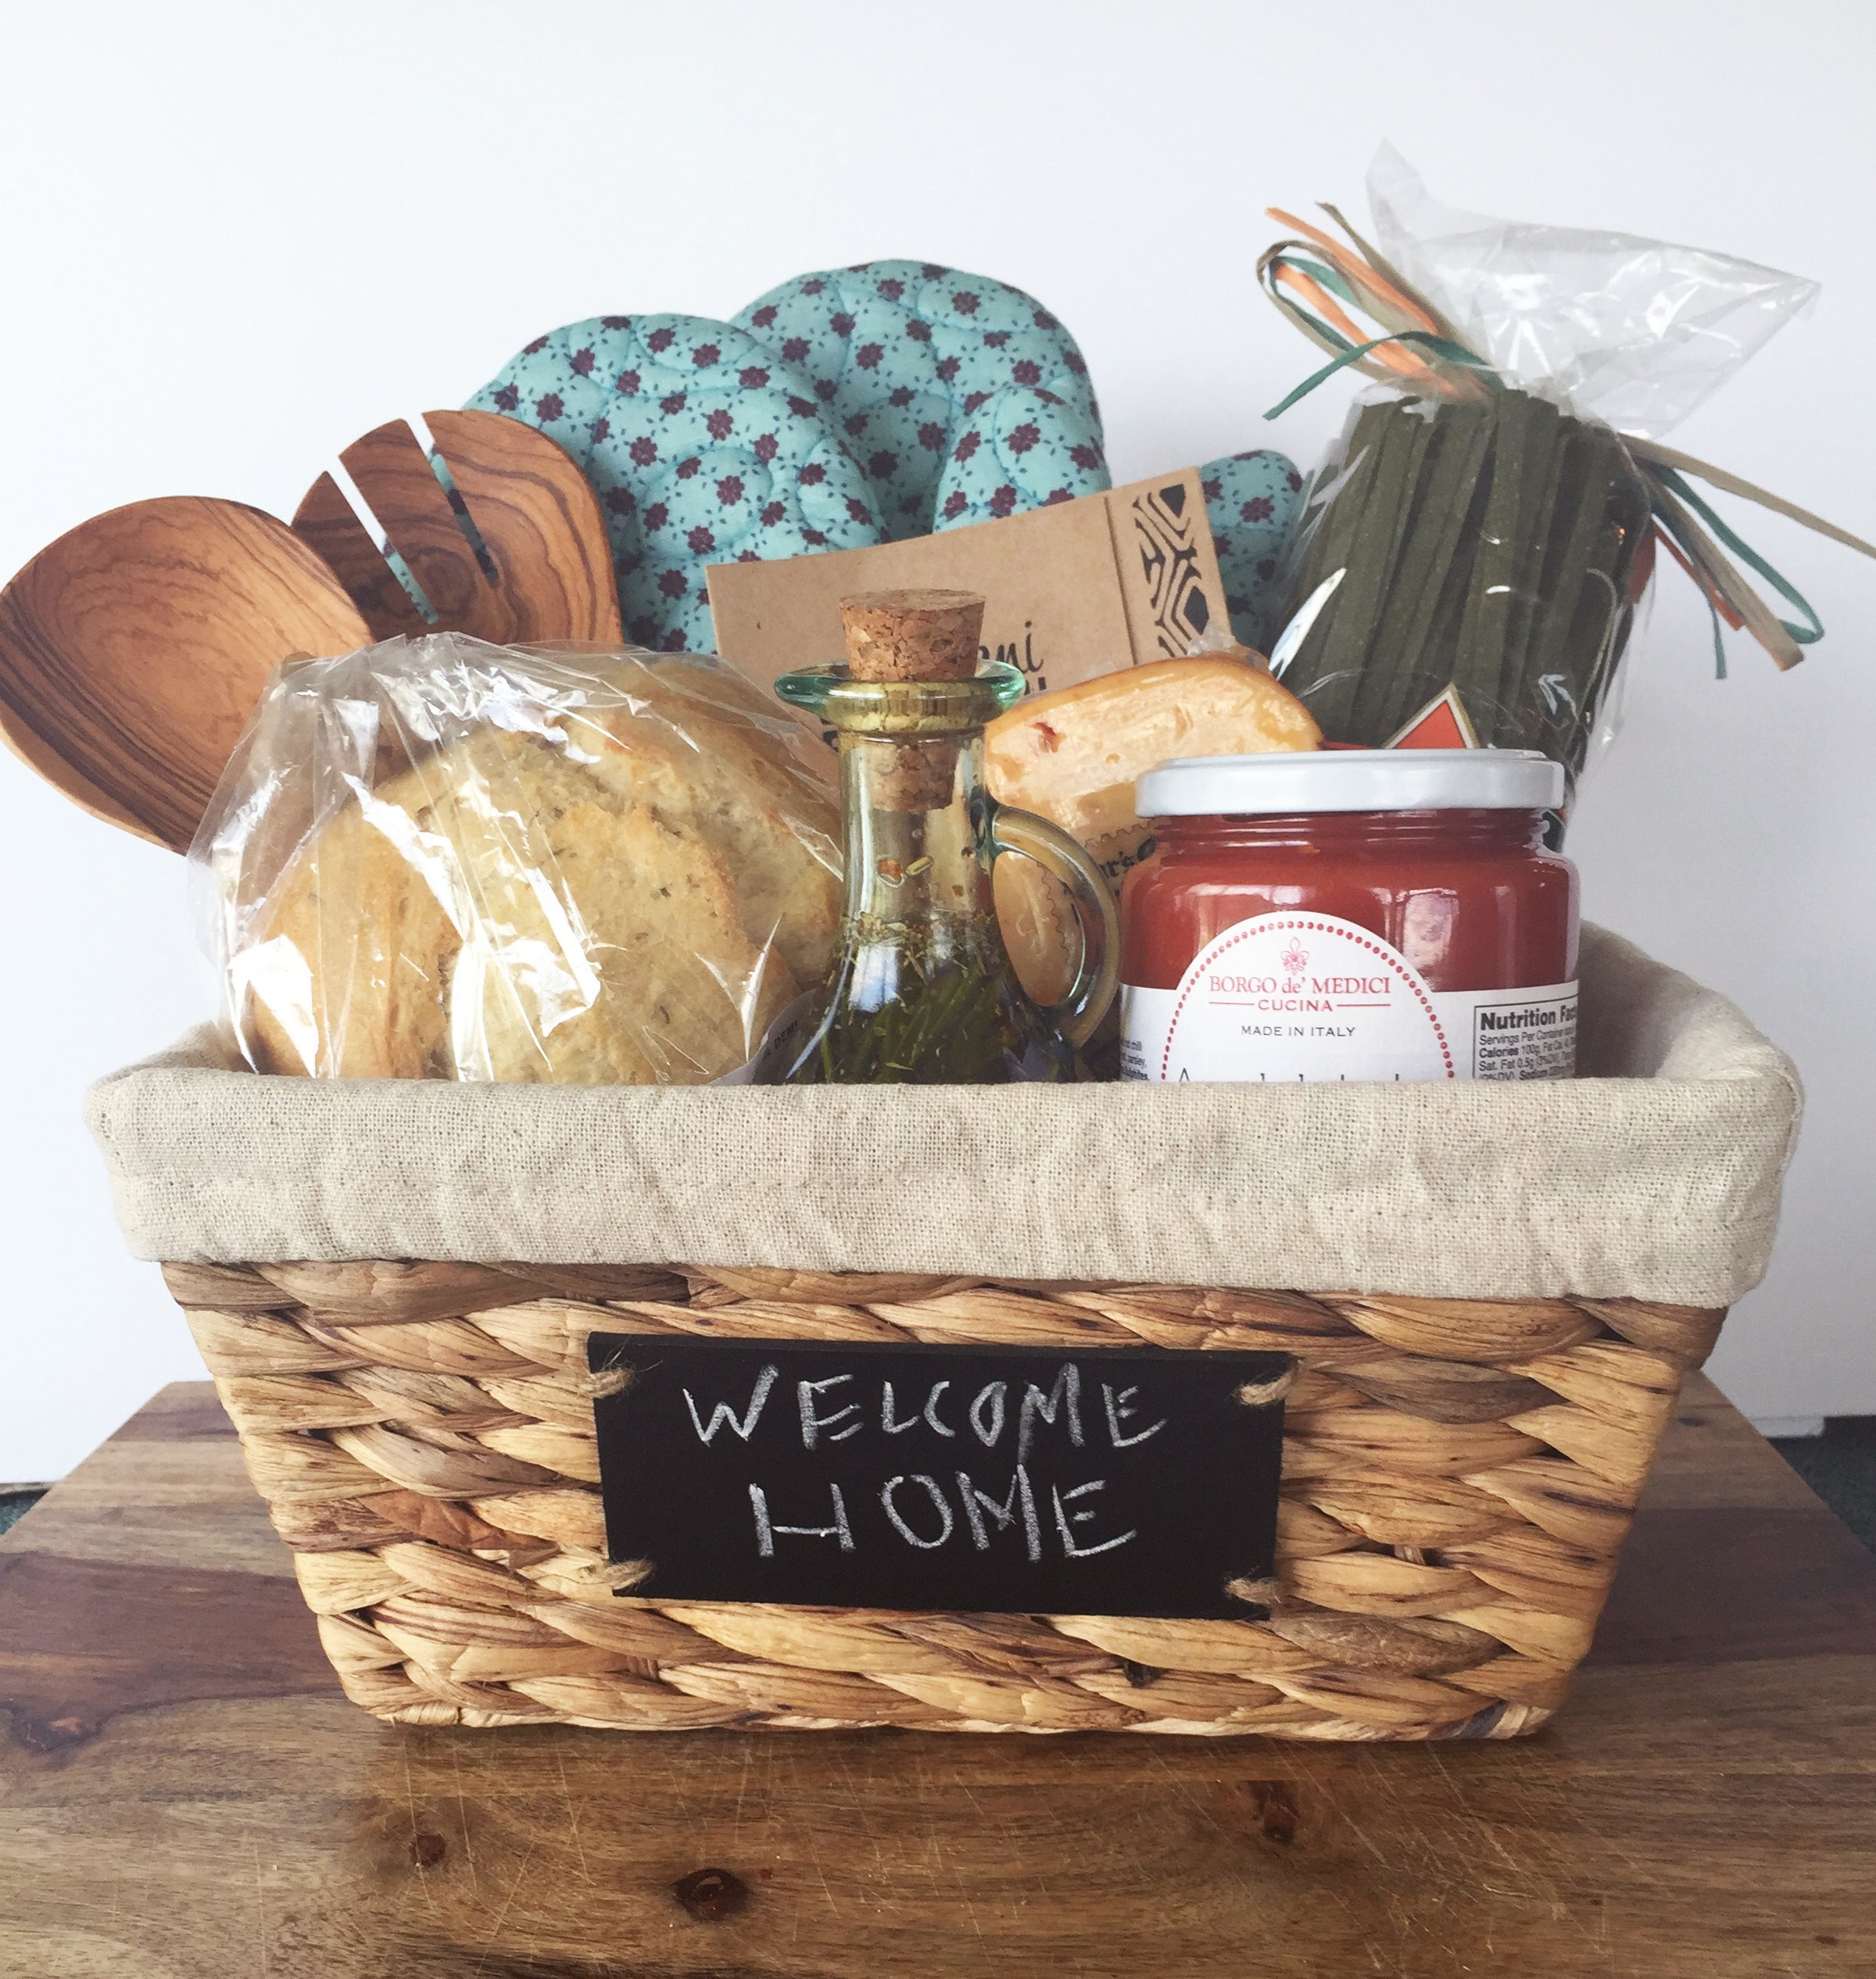 Welcome Home Gift Basket Ideas
 DIY HOUSEWARMING GIFT BASKET T A S T Y S O U T H E R N